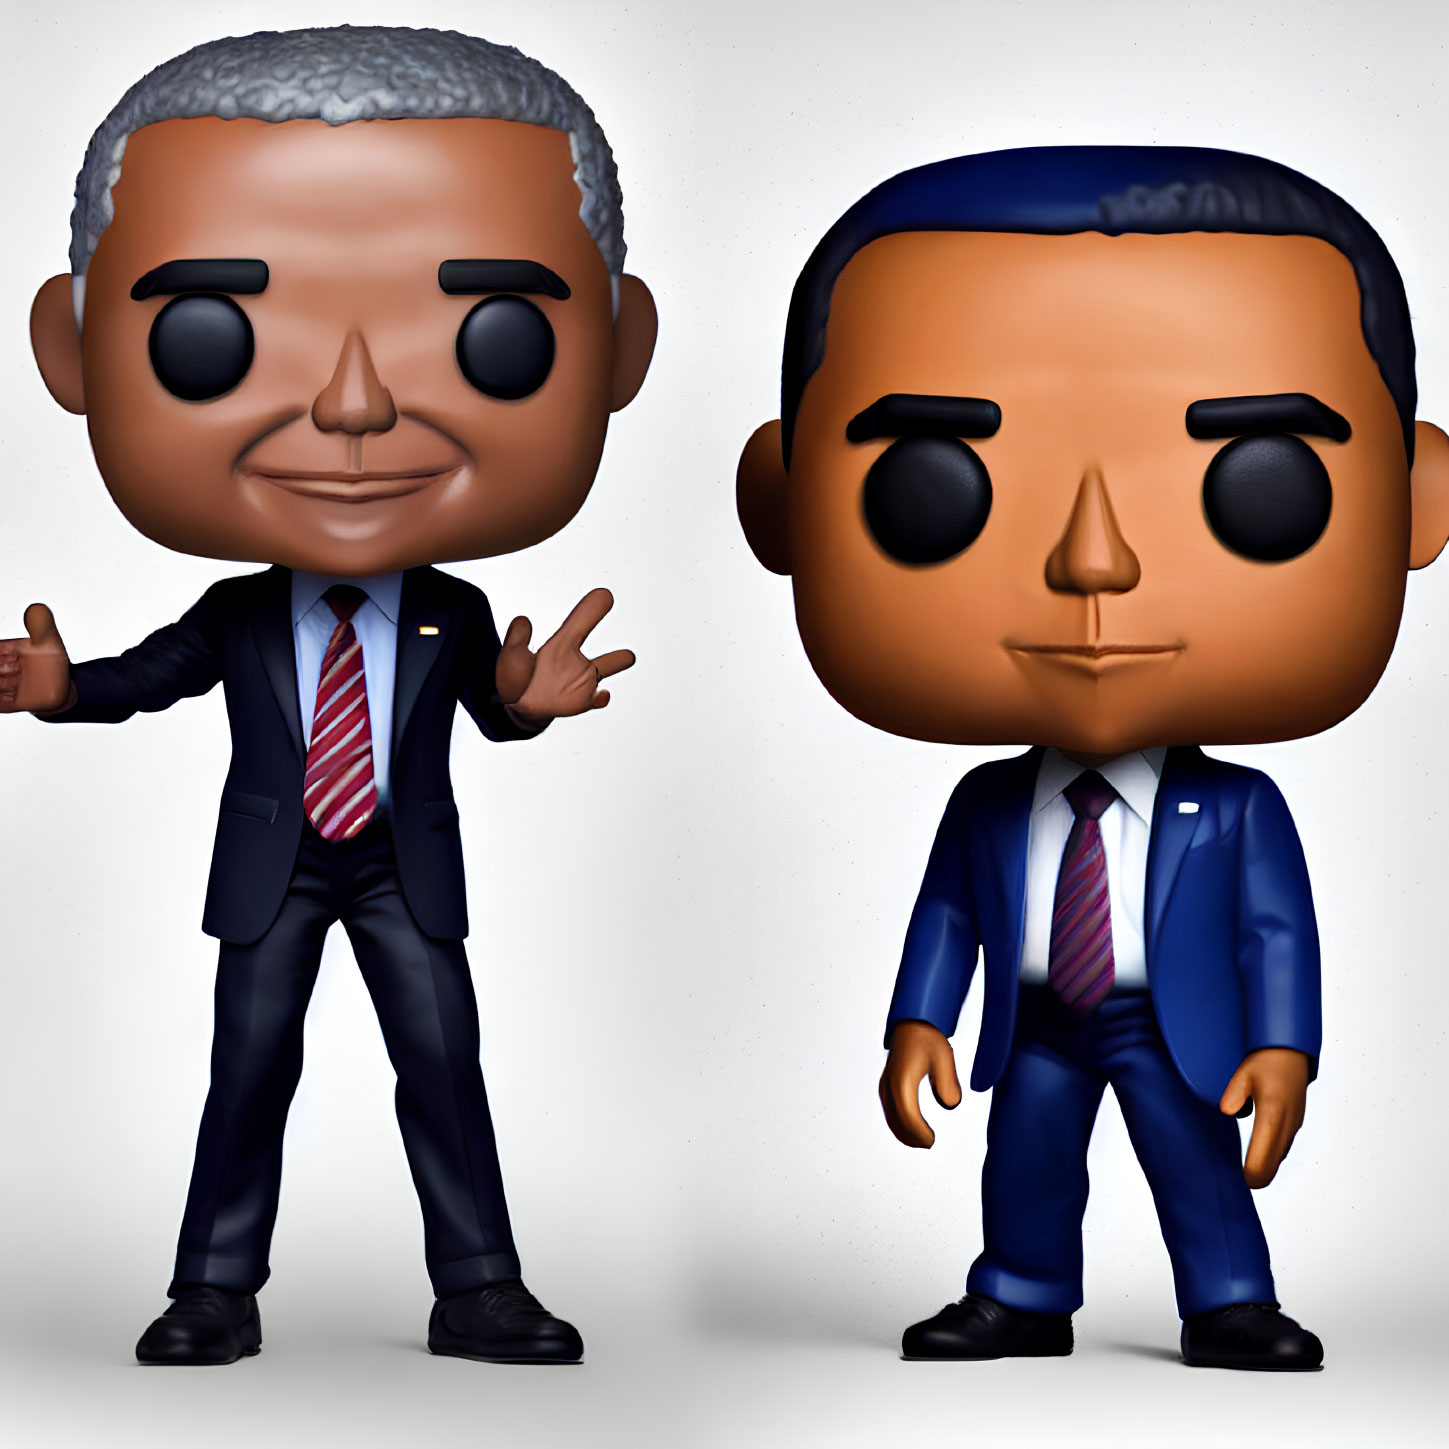 Stylized vinyl figurines in suits and ties with oversized heads and small bodies